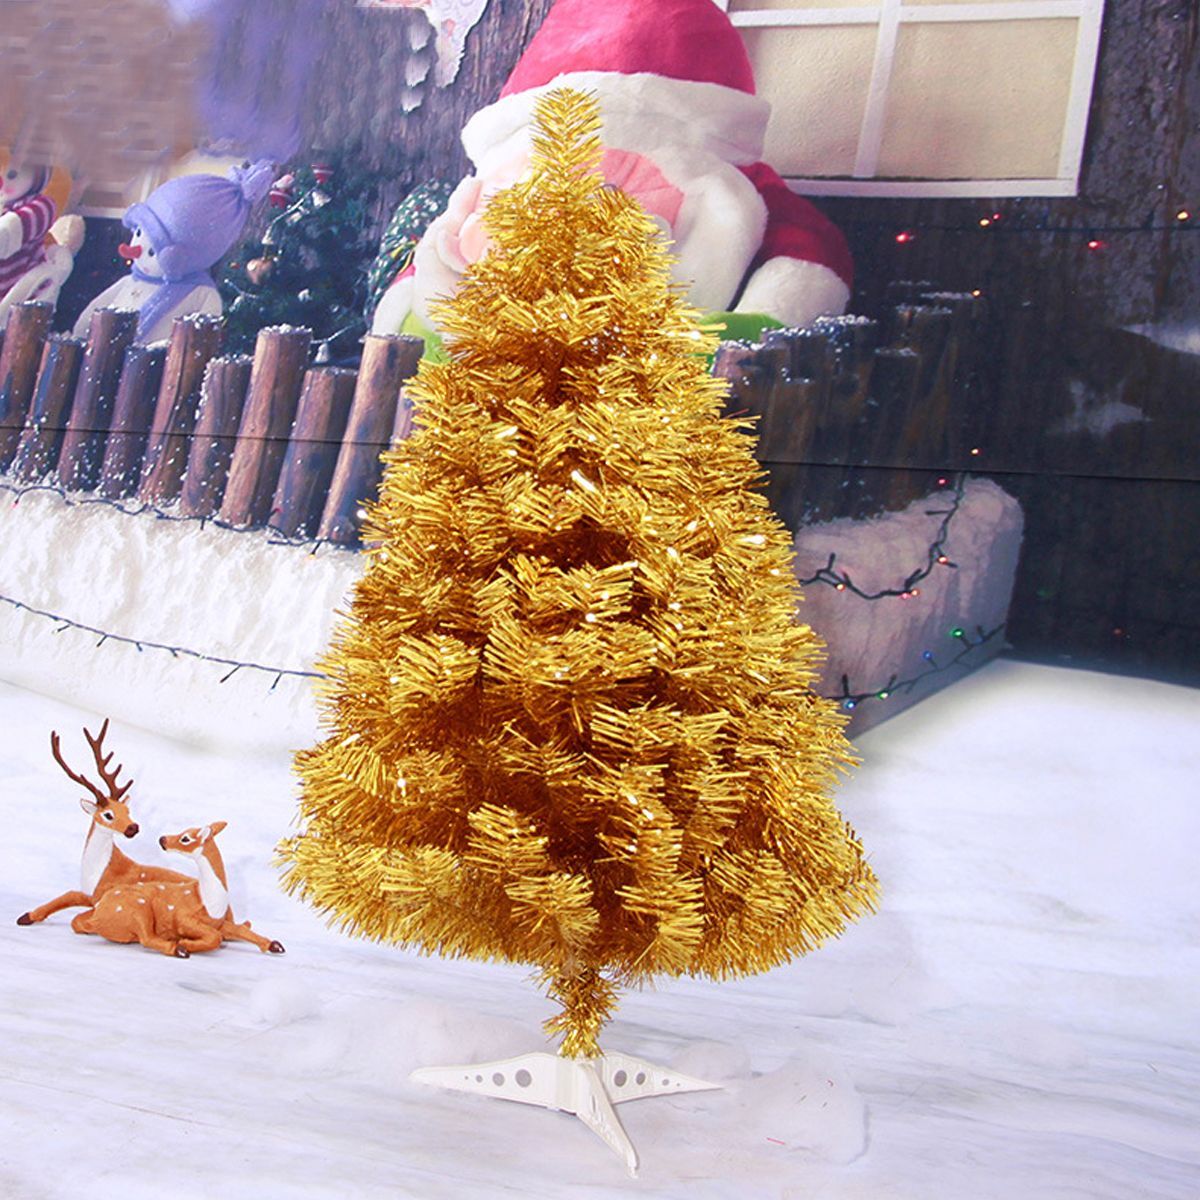 GoldSliver-3Ft-Tall-Christmas-Tree-Stand-Holiday-Season-Indoor-Outdoor-Trees-Decorations-1605712